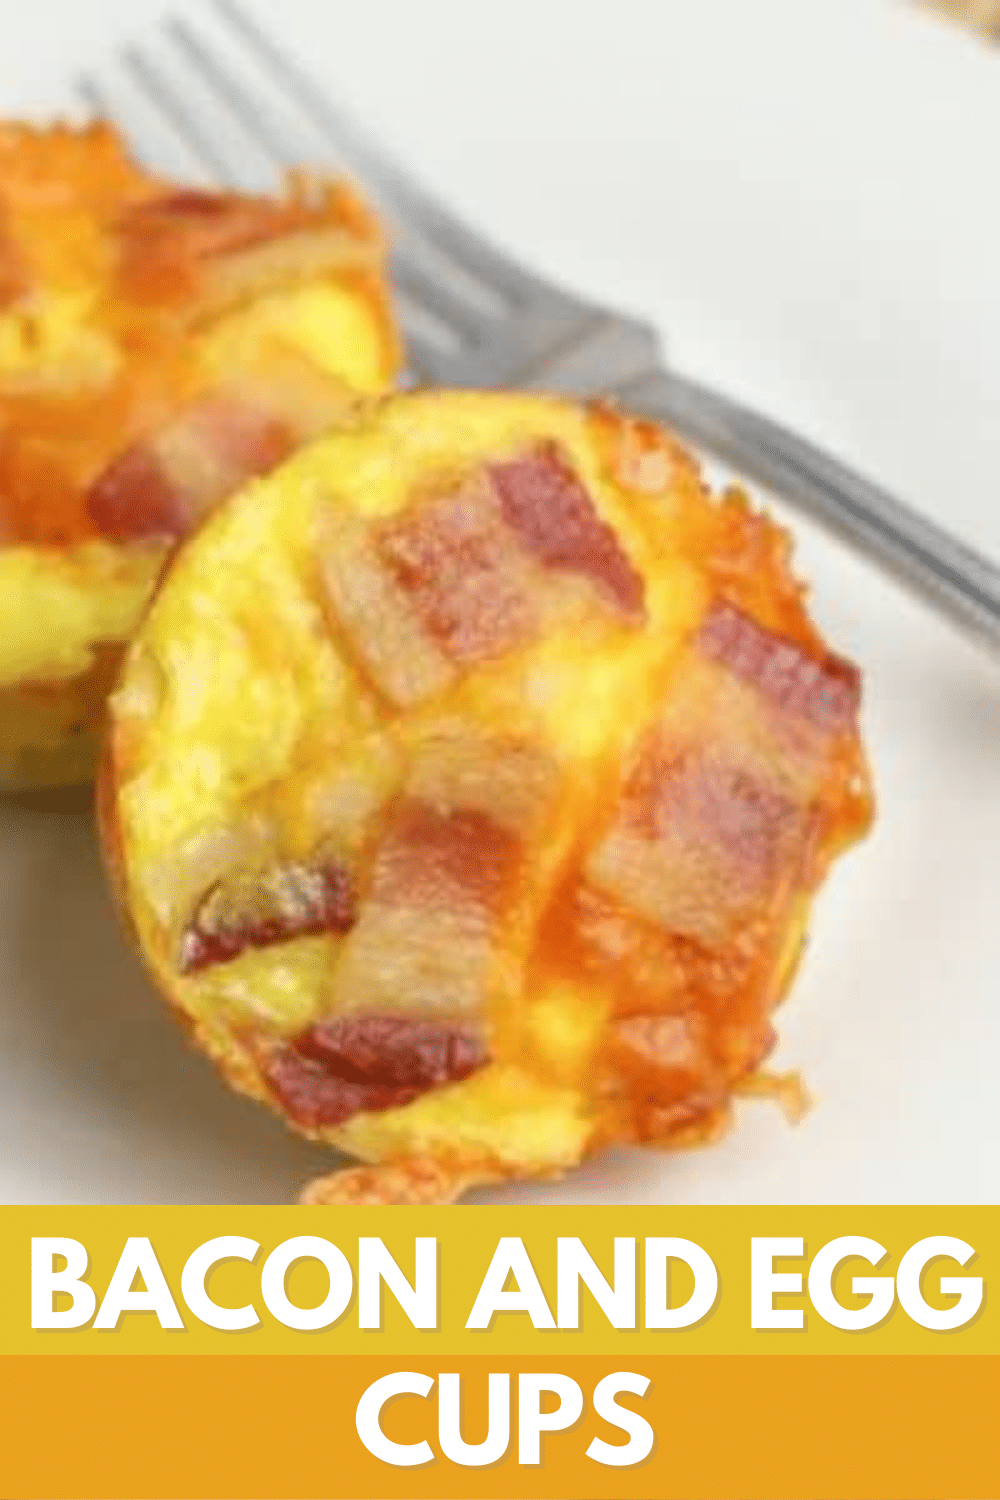 Bacon and Egg Cups are easy to make and delicious to eat. This easy breakfast recipe is great made ahead and reheated in the microwave for a snack. #breakfast #eggs #bacon via @wondermomwannab